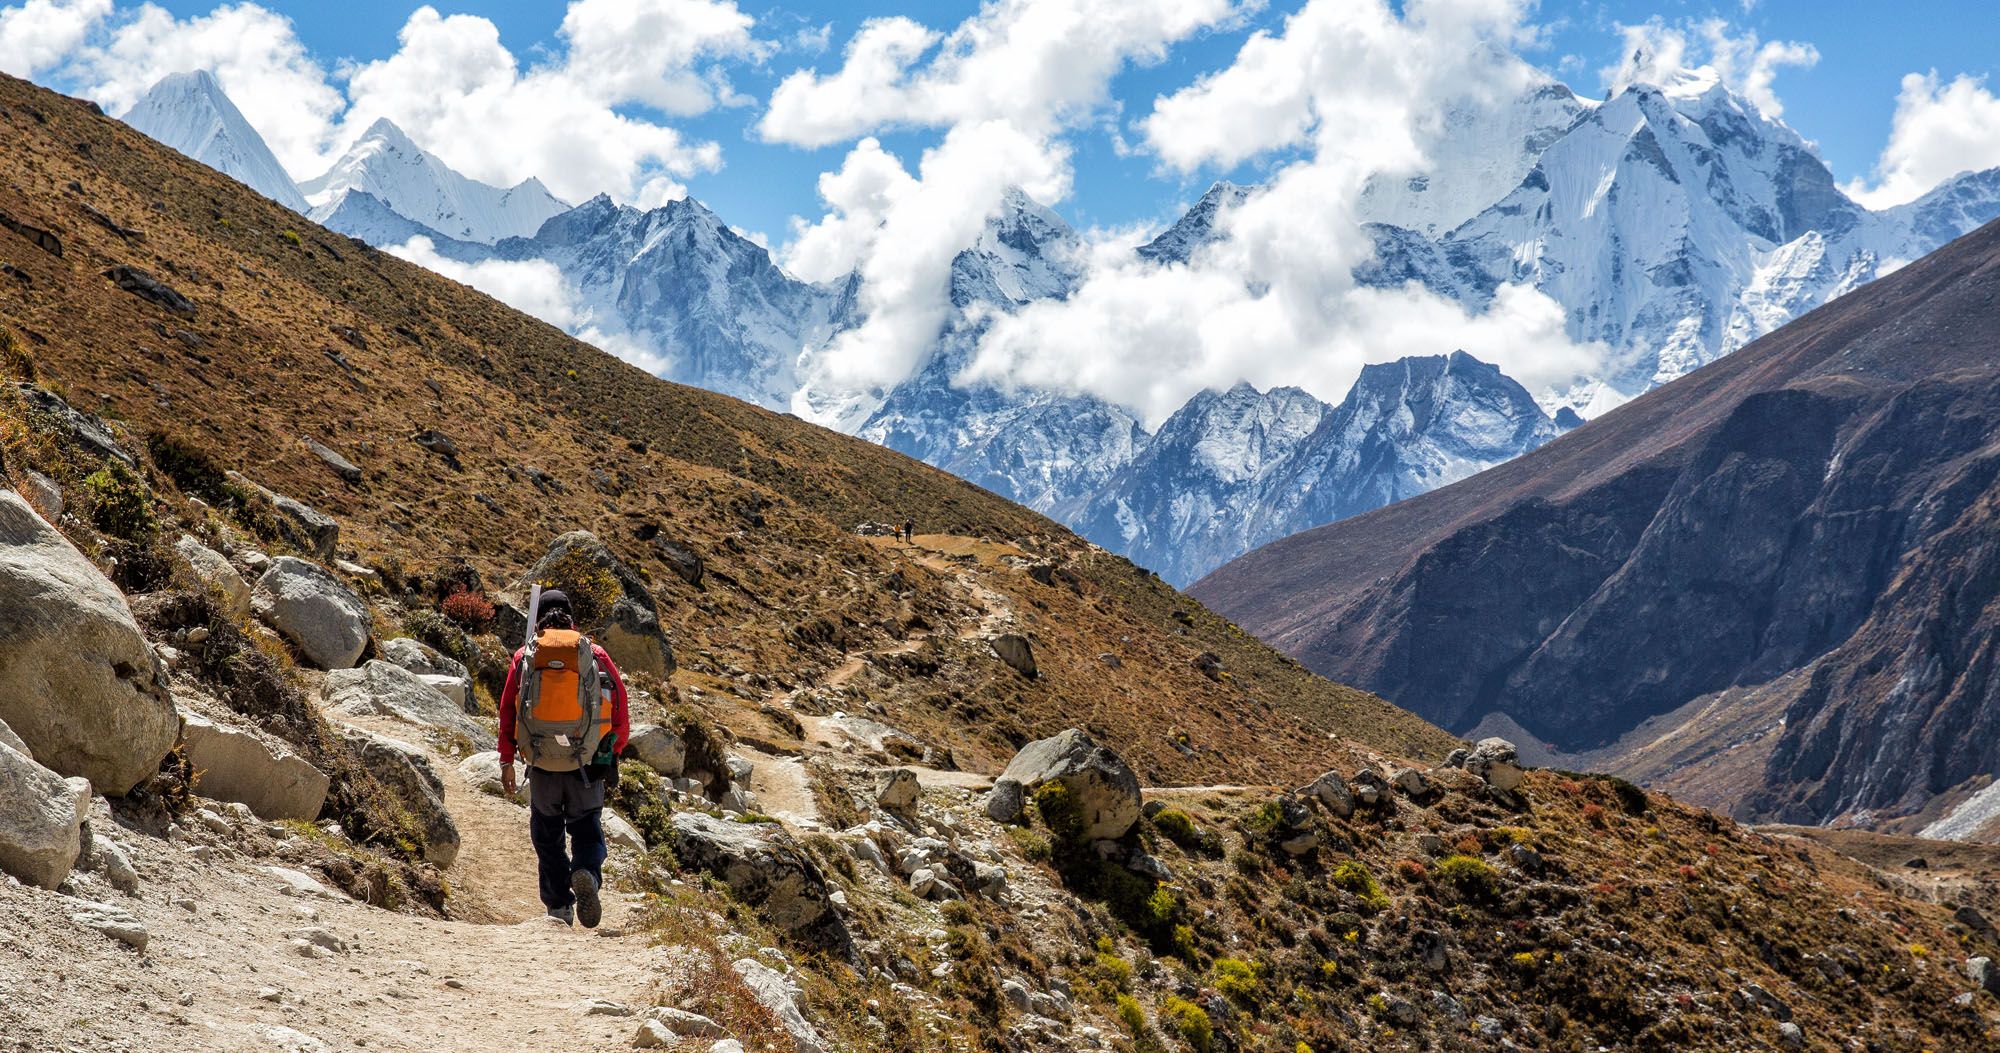 Featured image for “How to Trek to Everest Base Camp: Your Questions, Answered”